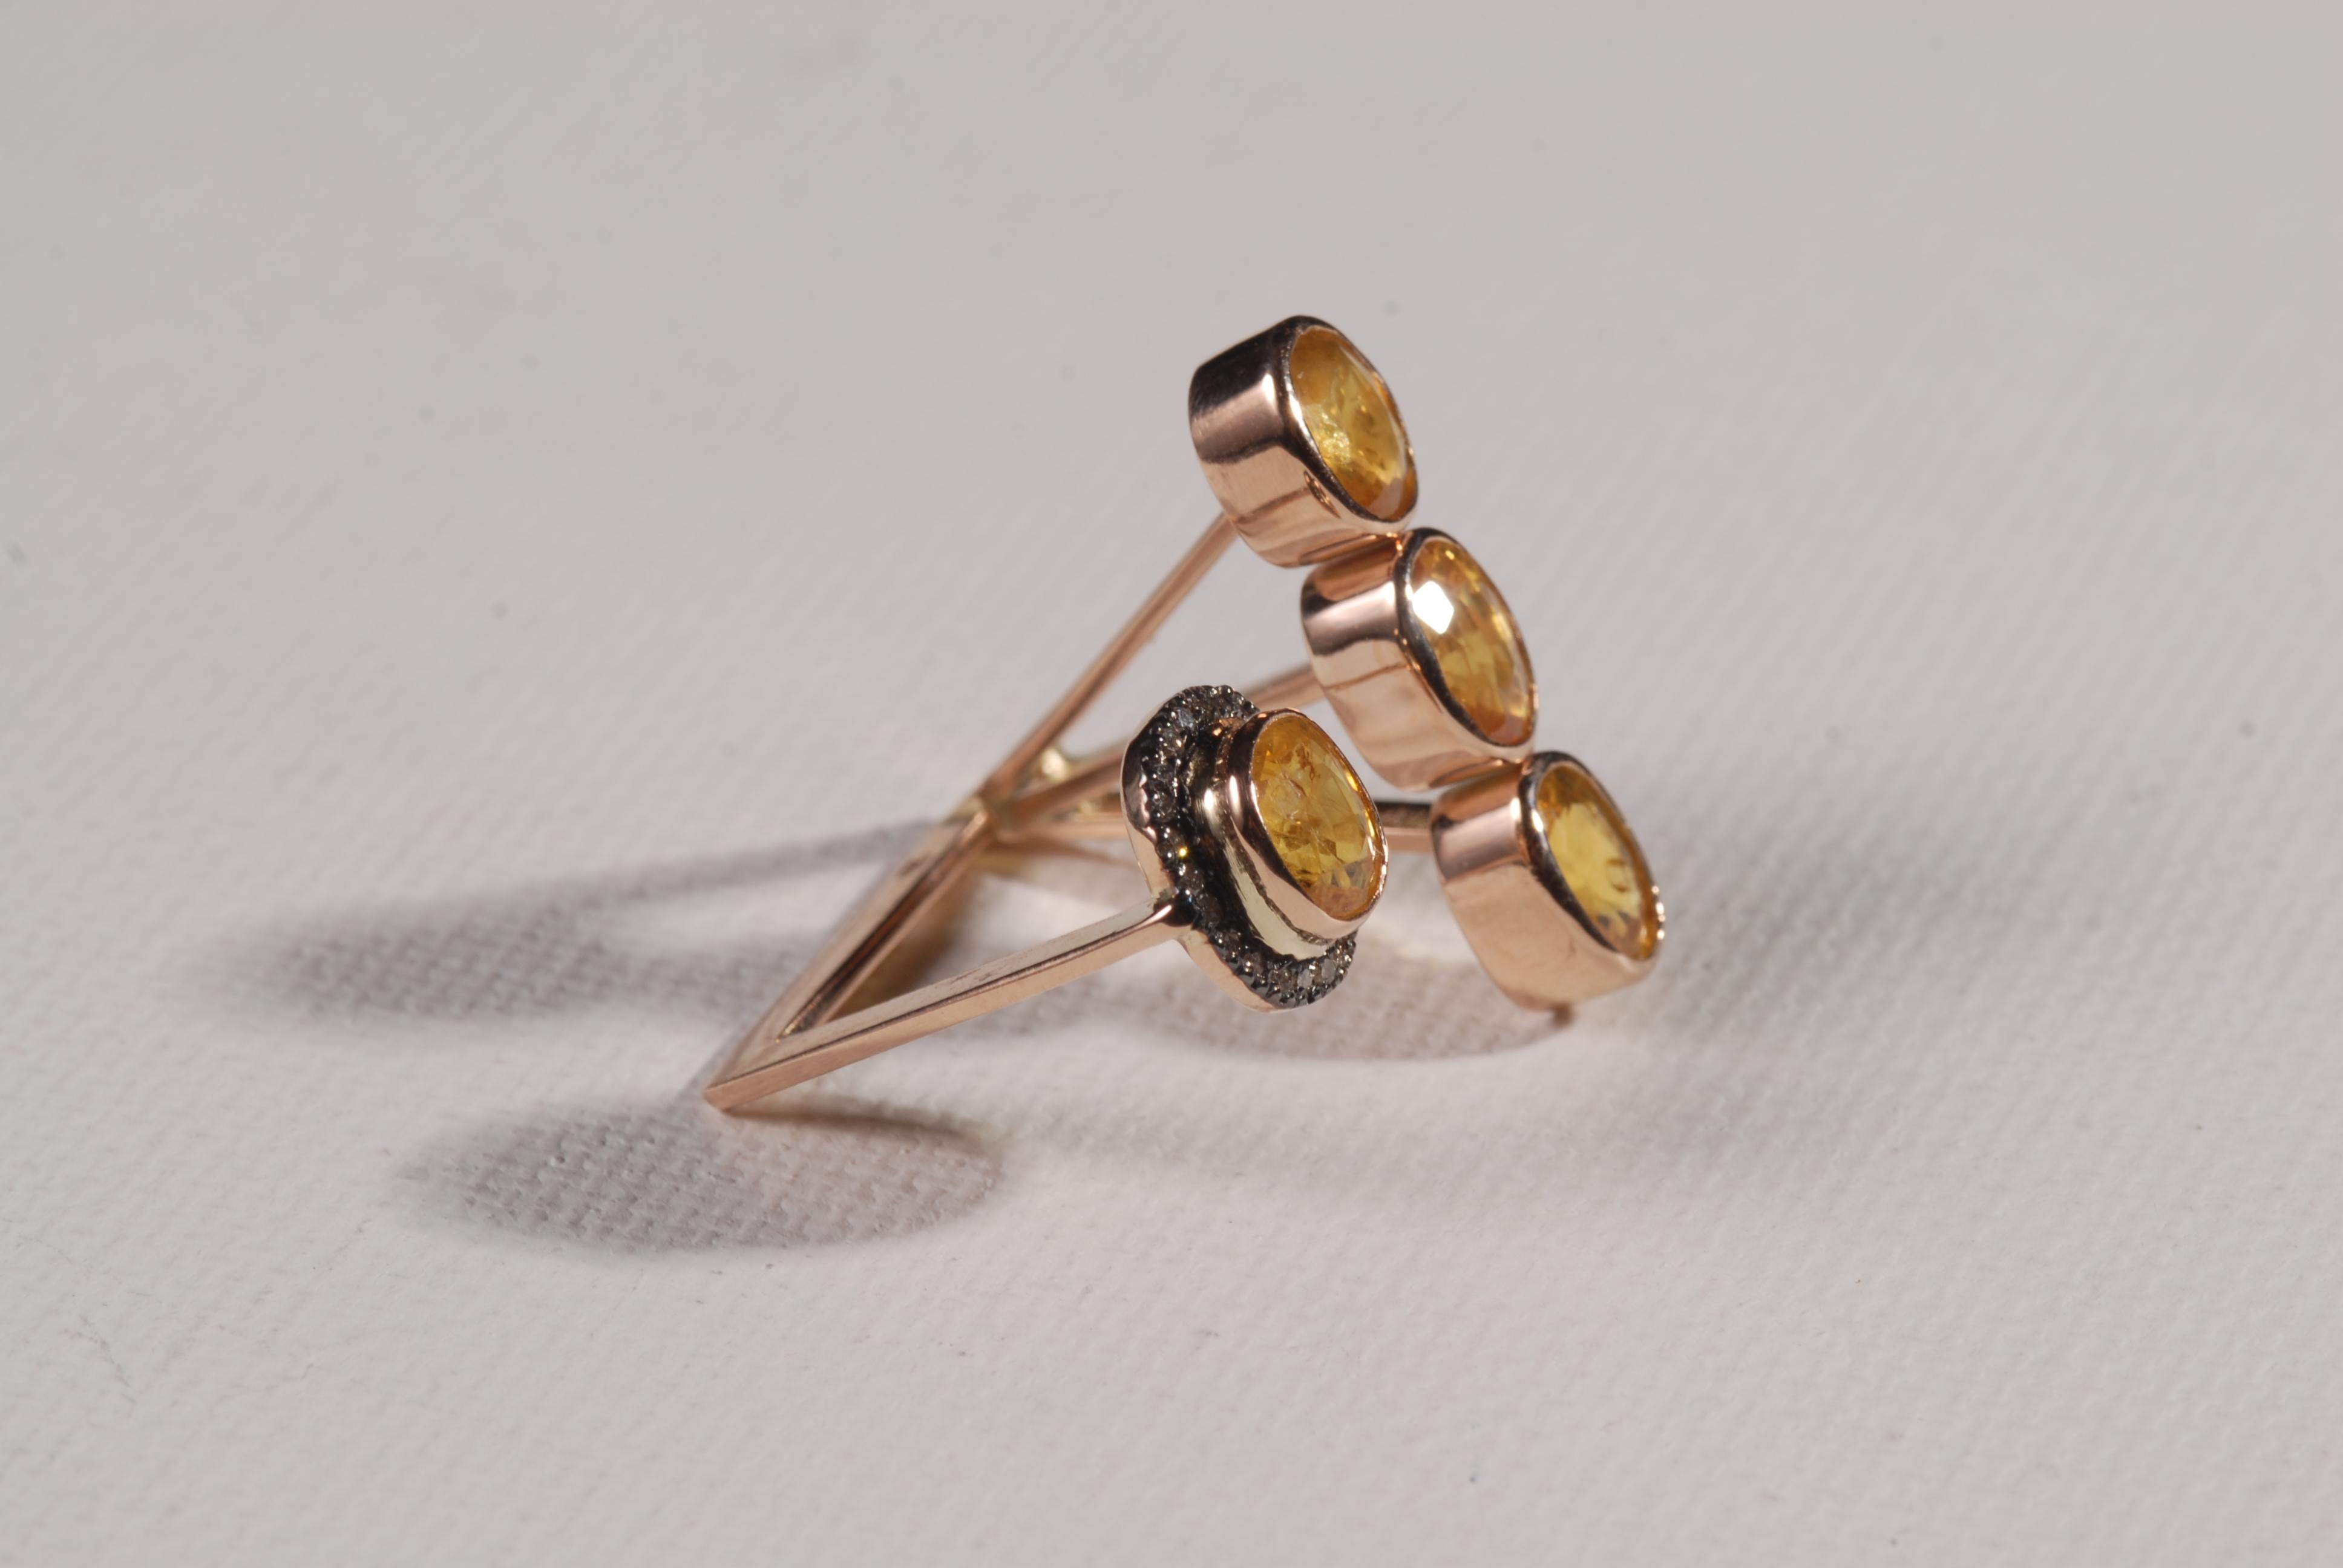 14 carat gold contemporary cocktail ring with yellow sapphires and diamonds.  